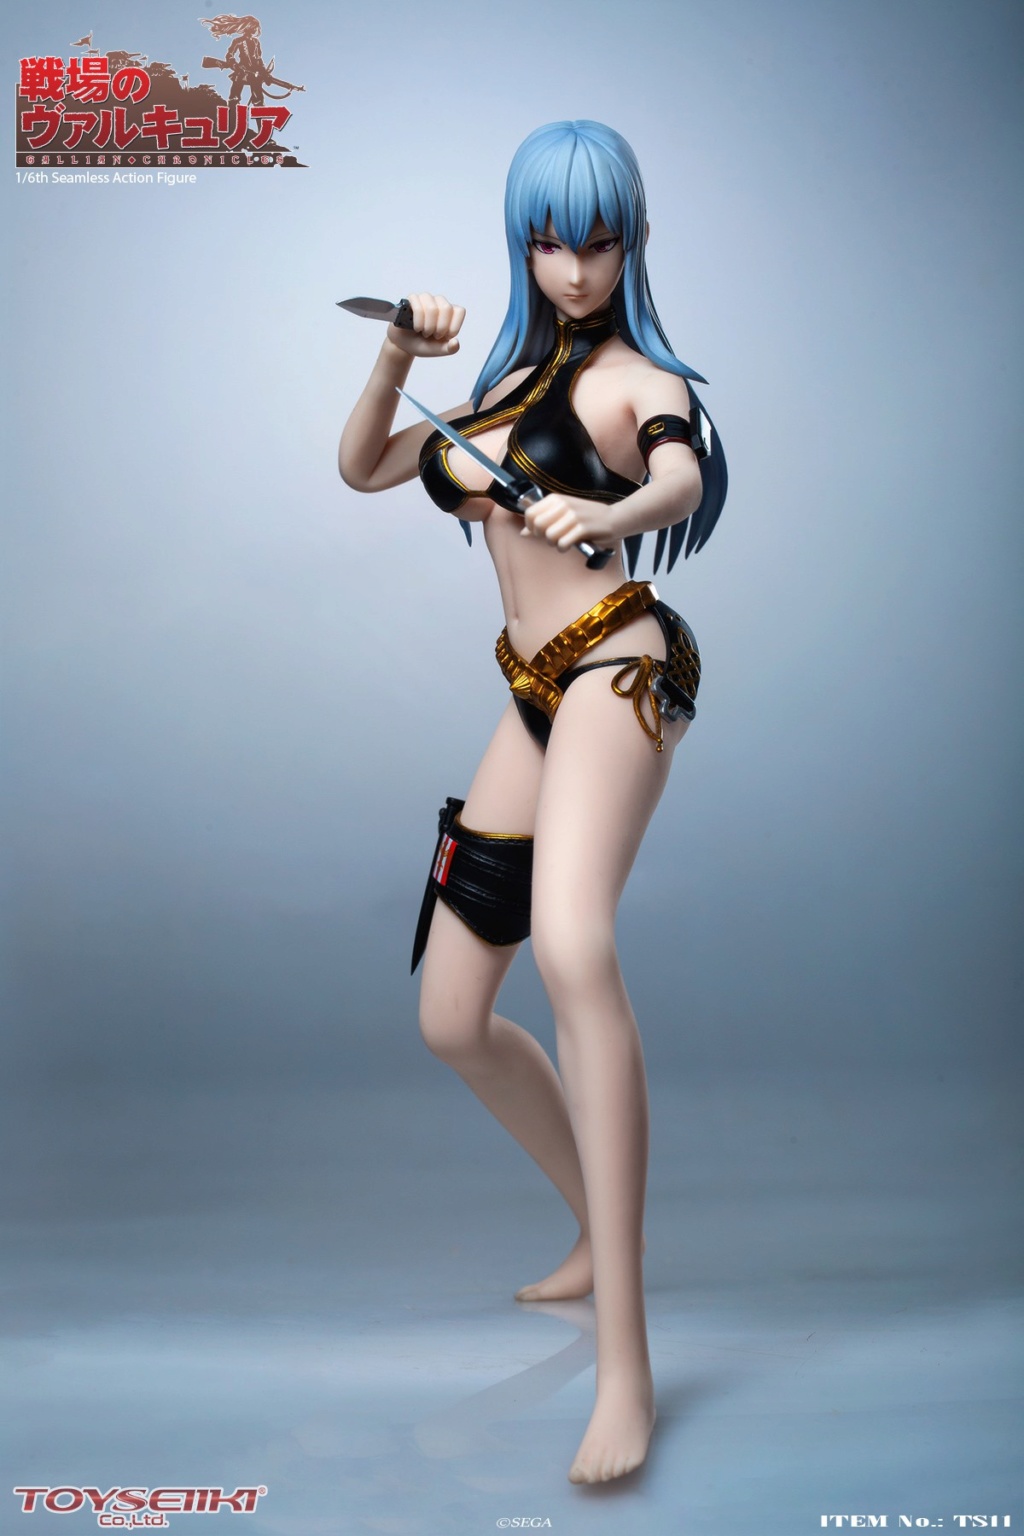 SelvariaBles - NEW PRODUCT: TOYSEIIKI: 1/6 "The Valkyrie of the Battlefield"- Selvaria Bles Action Figure (# TS11) 12010810